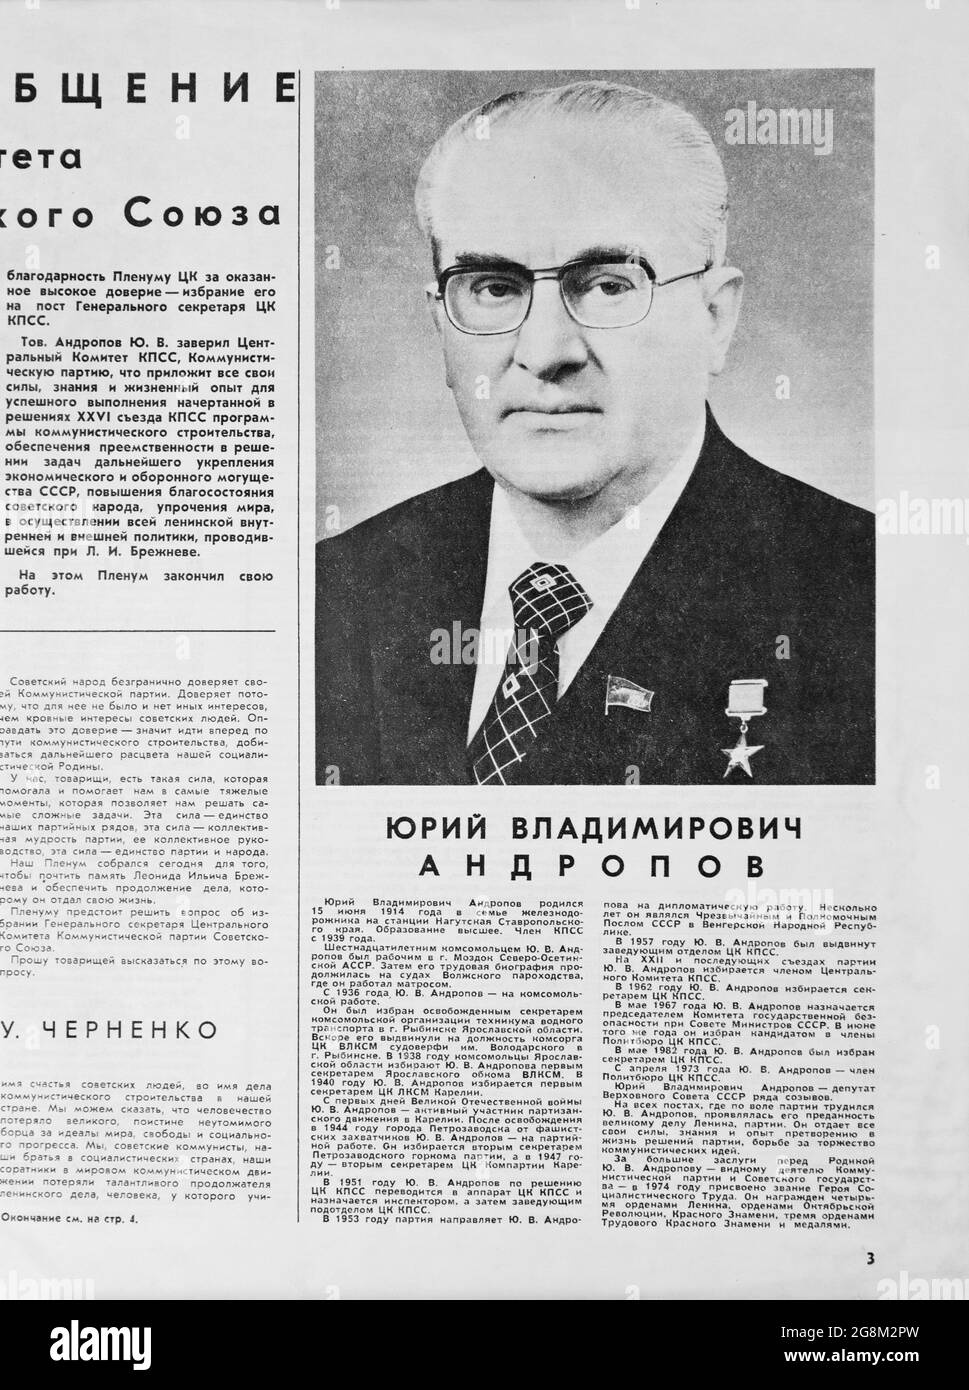 After death leaders of communist party USSR Leonid Brezhnev. Portrait of Yuri  Andropov and his biography in the journal, November, 1982, USSR Stock Photo